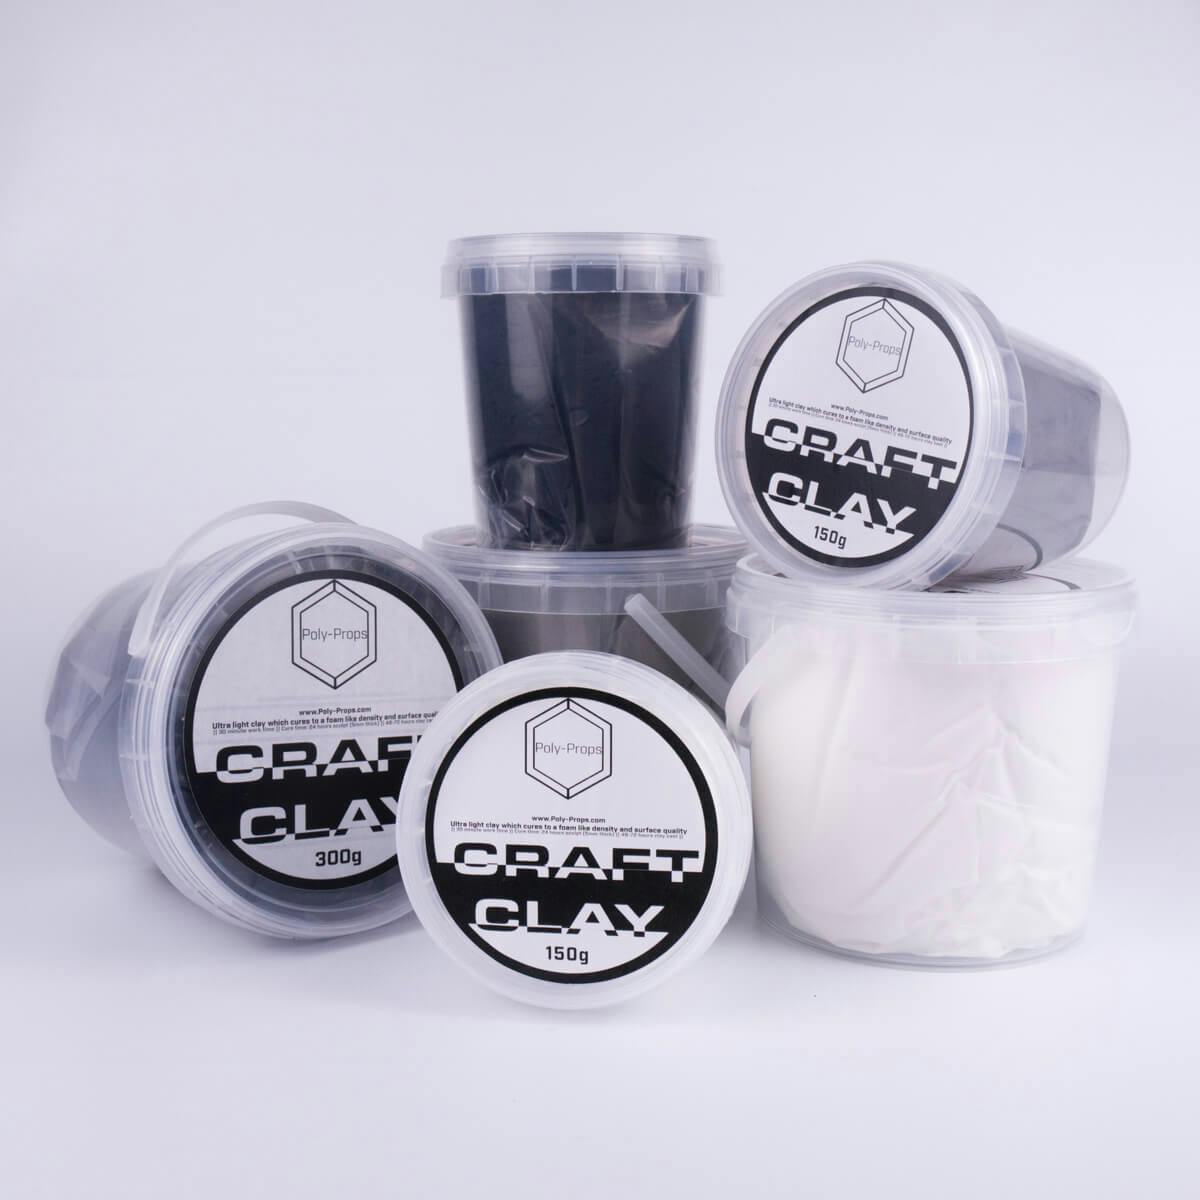 Foam clay buckets in white, grey and black